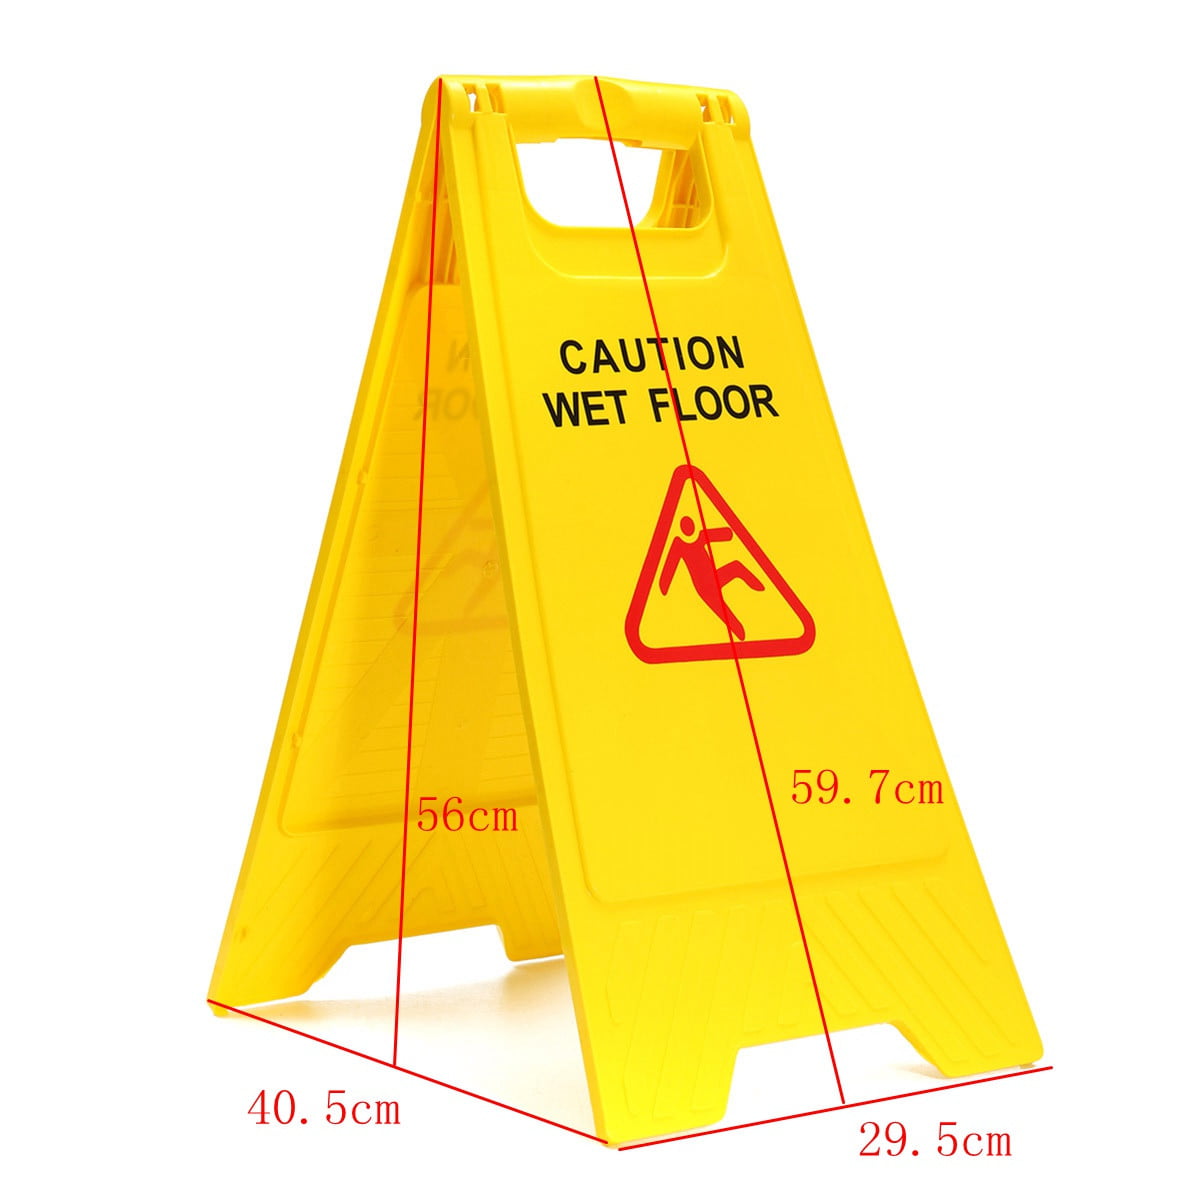 2 x Wet Floor Hazard Warning Safety Signs Offices Factories Workshops Cleaning 